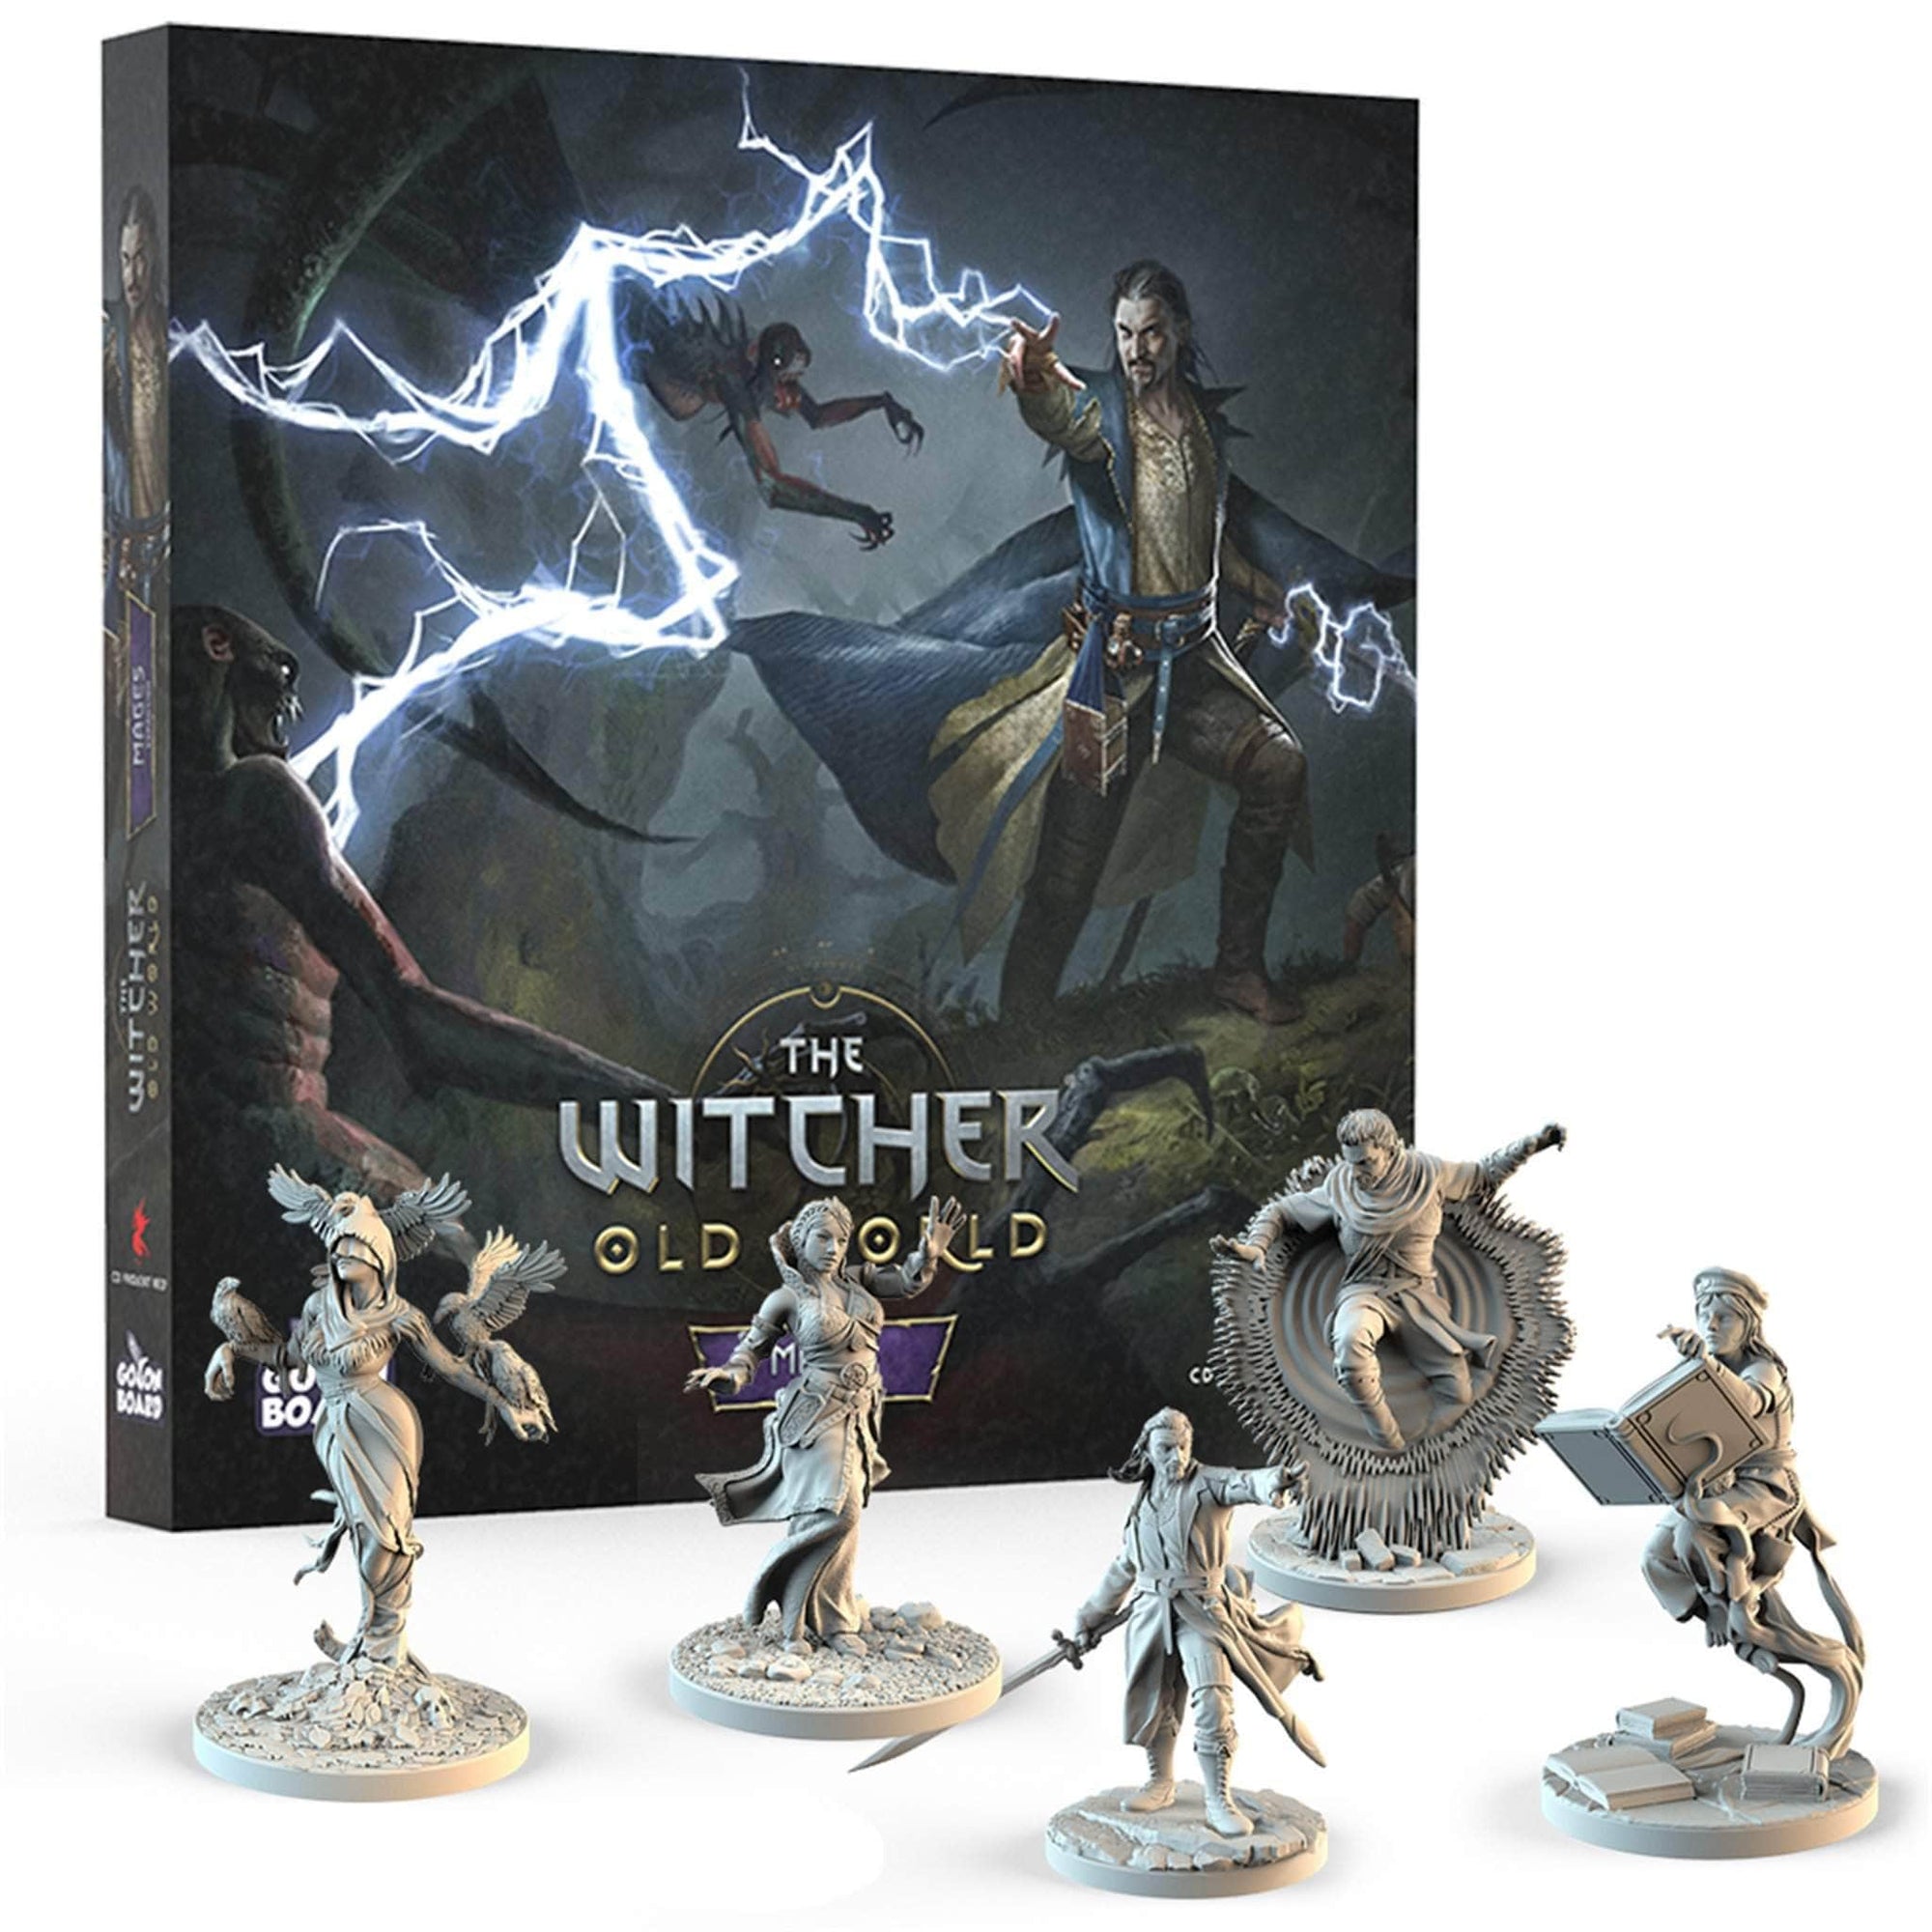 The Witcher: Mages Well Go On Board KS001114B